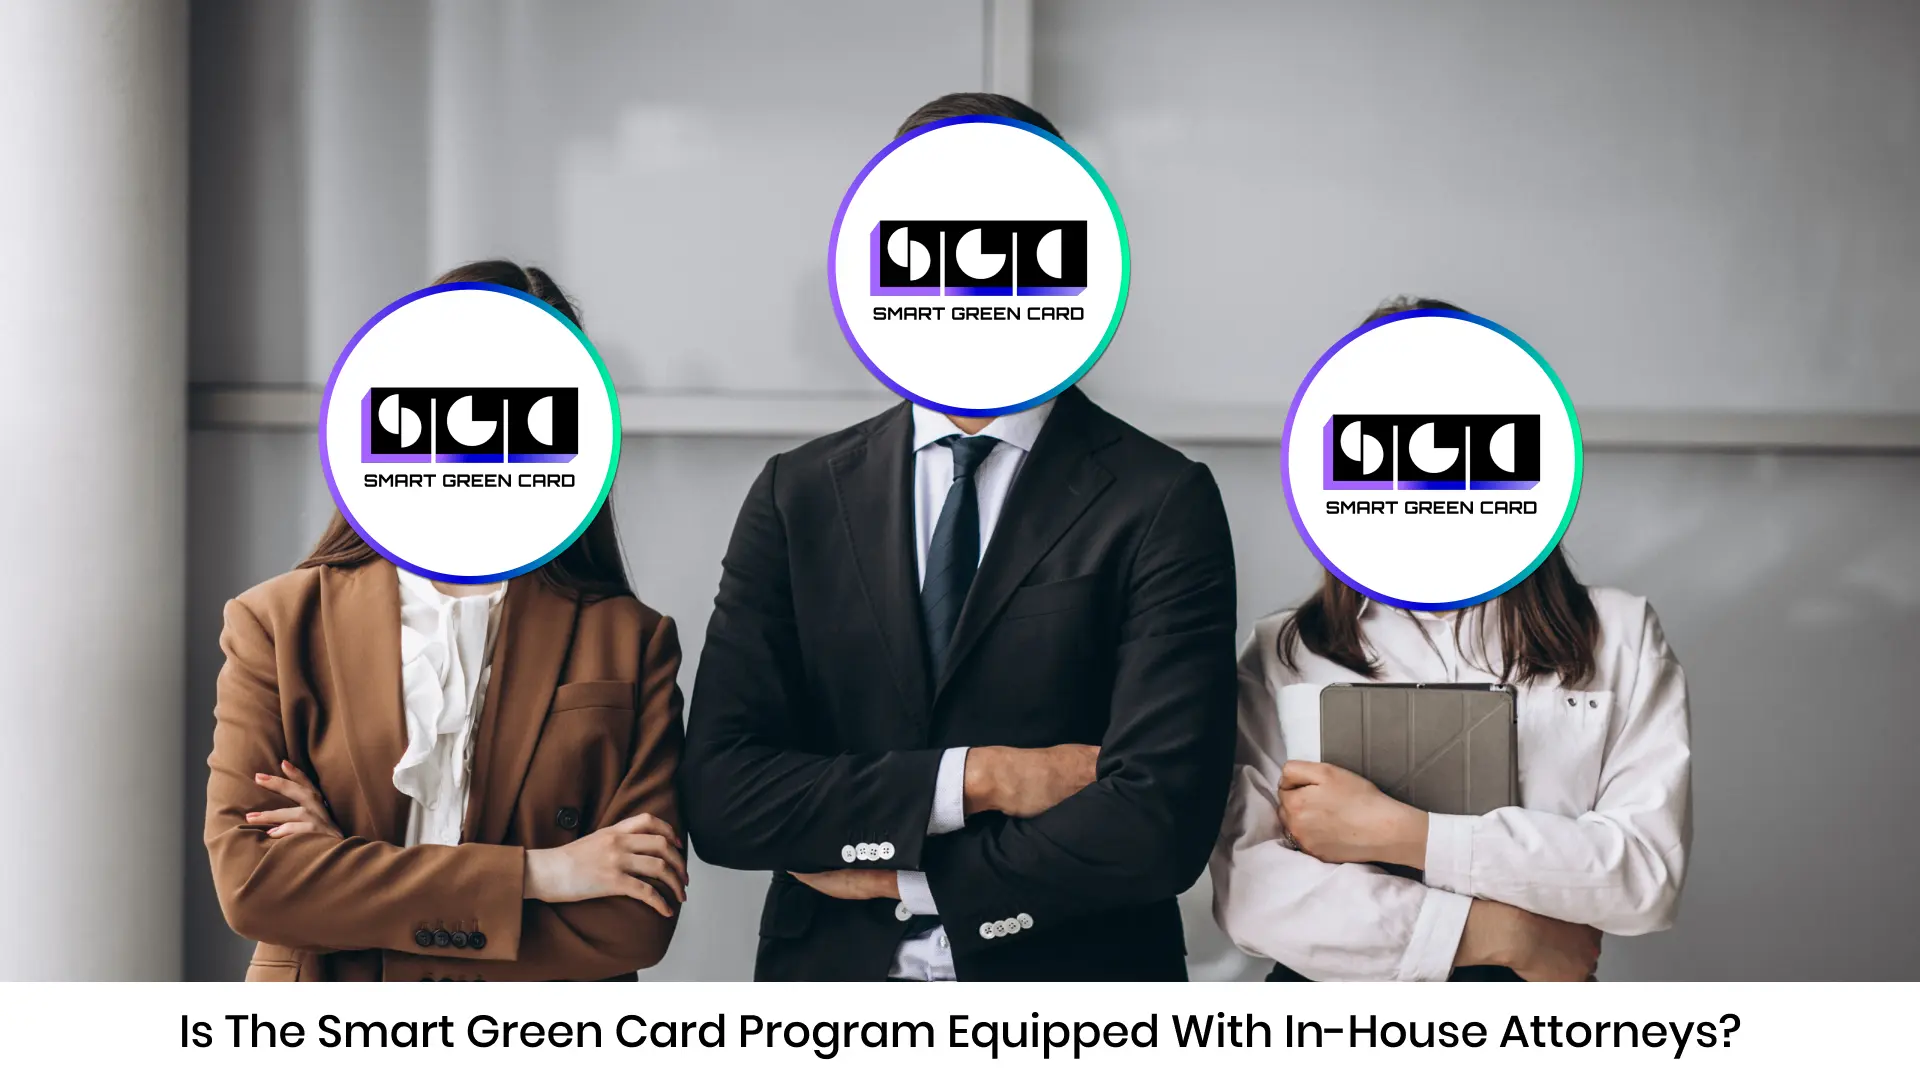 Is the Smart Green Card Program Equipped with In-house Attorneys?